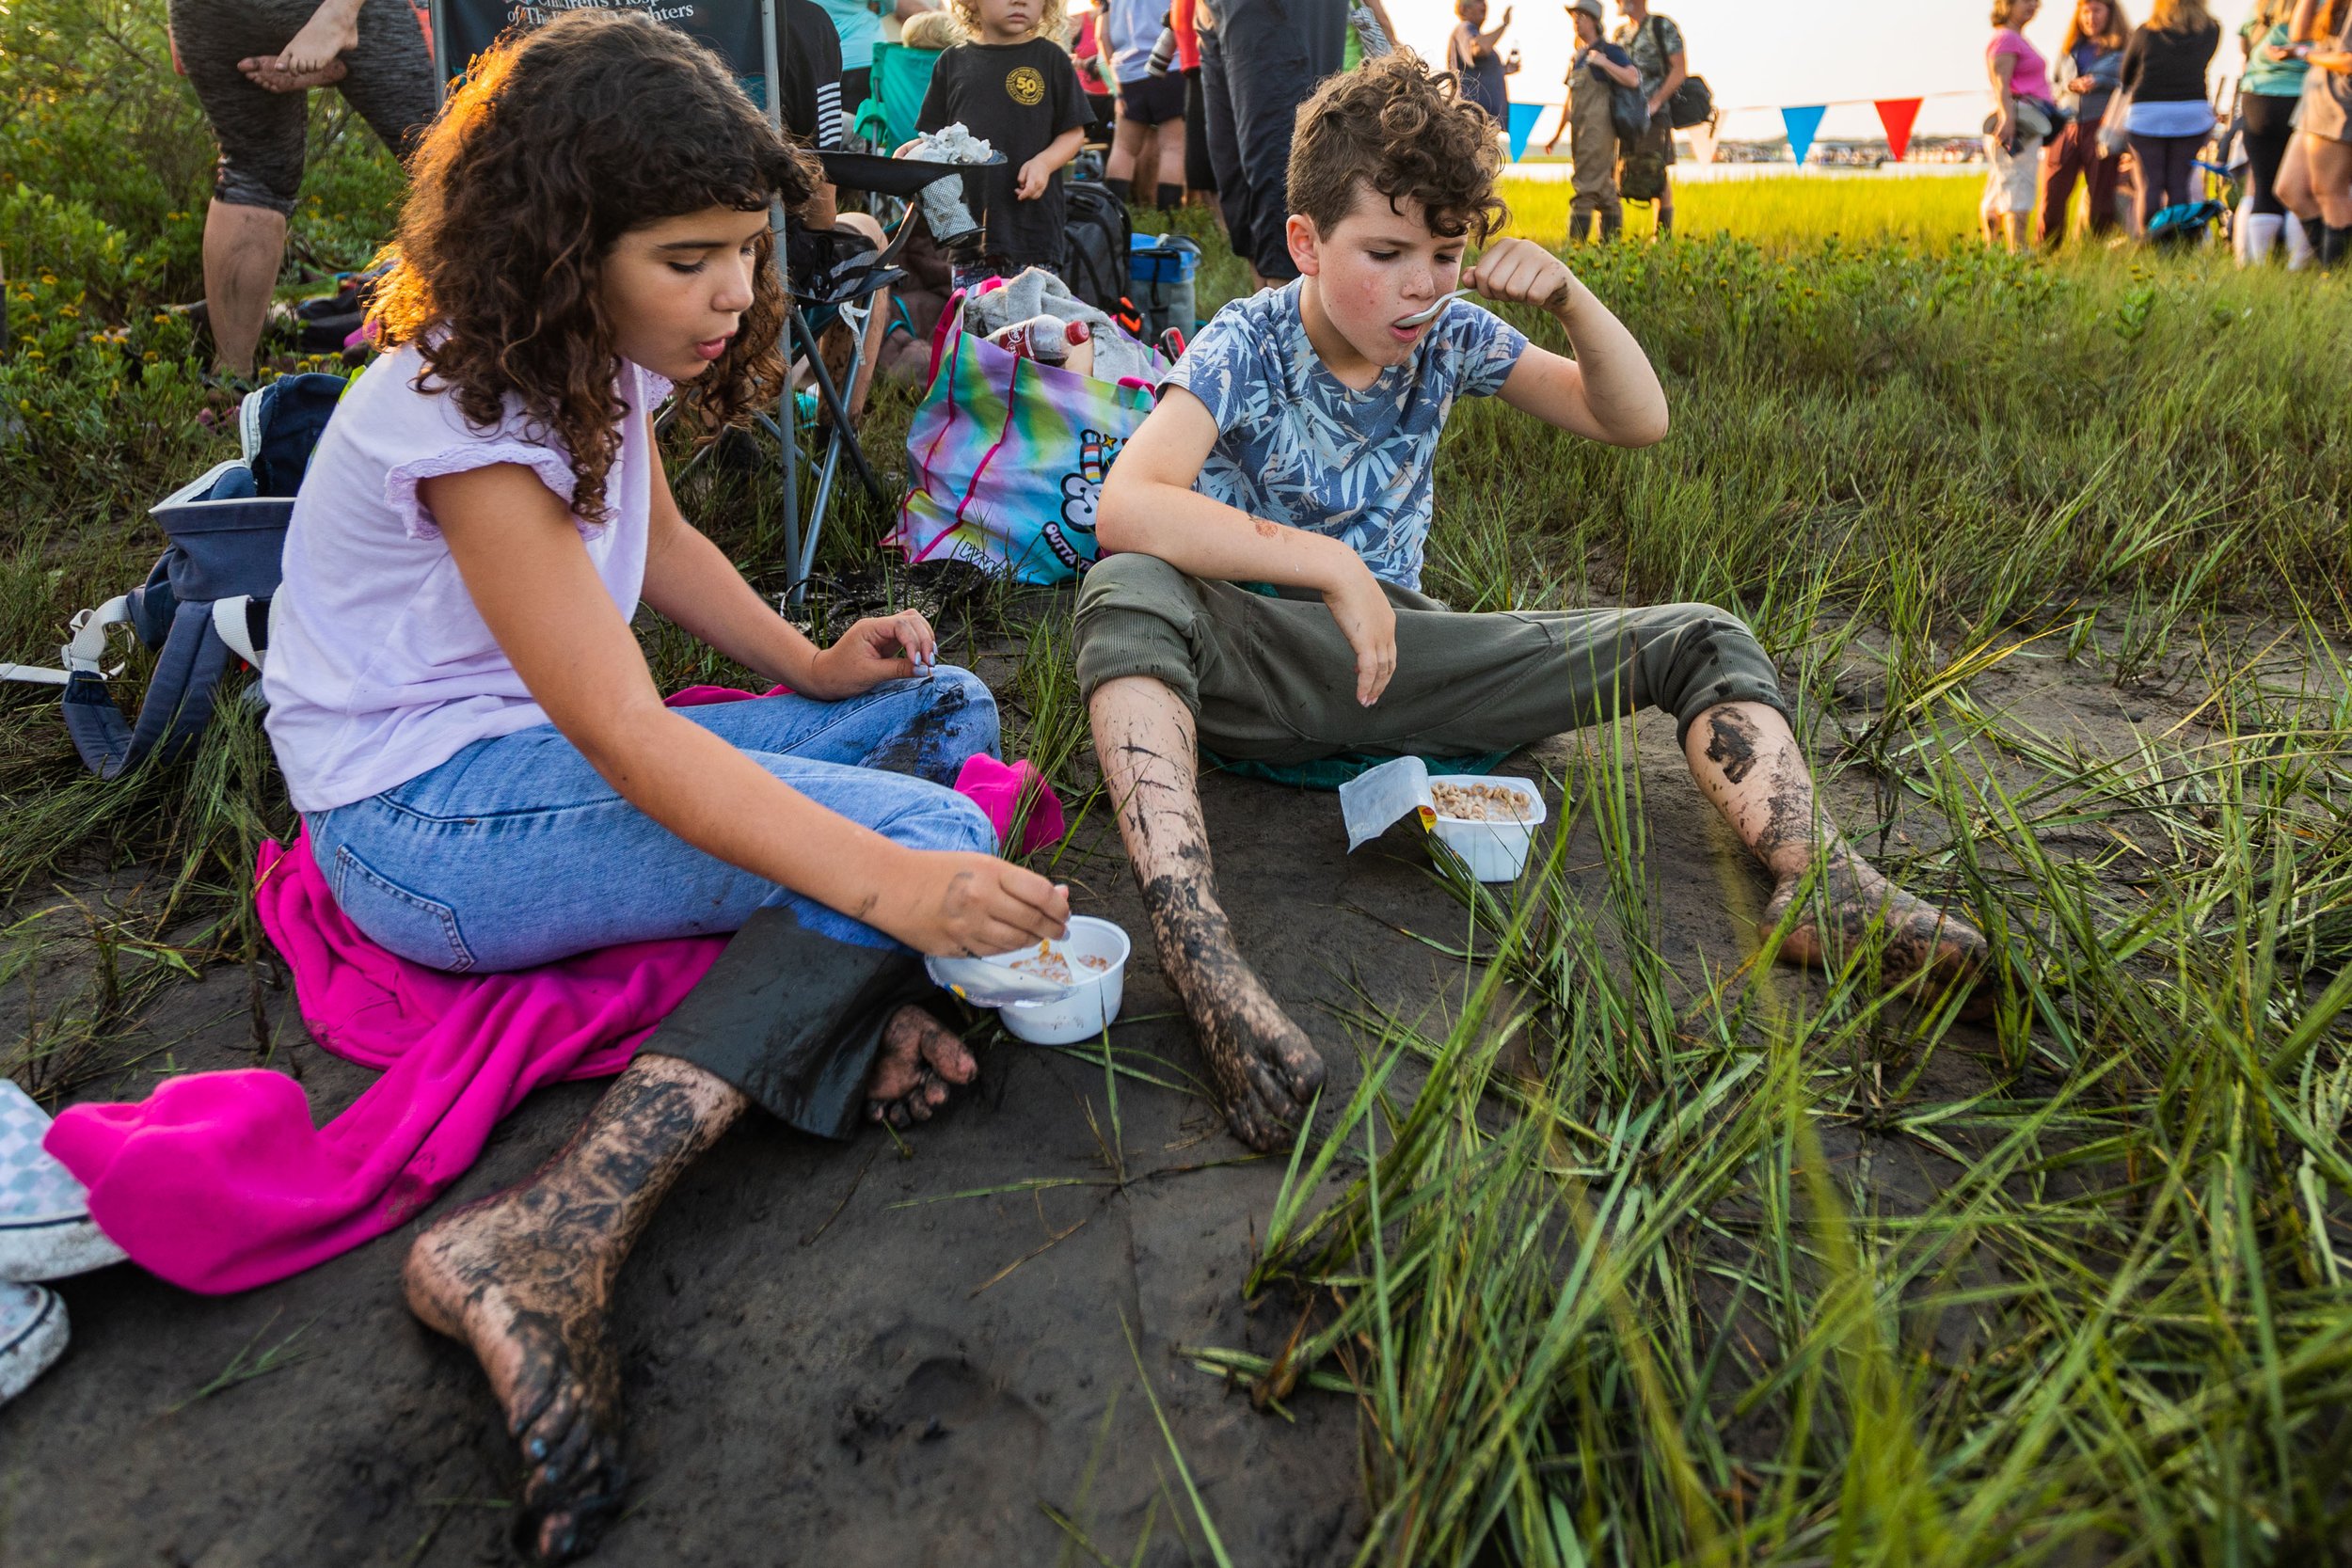  Tallula Loeb, 9, left, and brother Felix Loeb, 7, of Ojai, California, eat cereal at 6 a.m. after crossing the marsh to secure a spot to watch the Saltwater Cowboys swim ponies during slack tide from Assateague Island to Chincoteague Island on July 